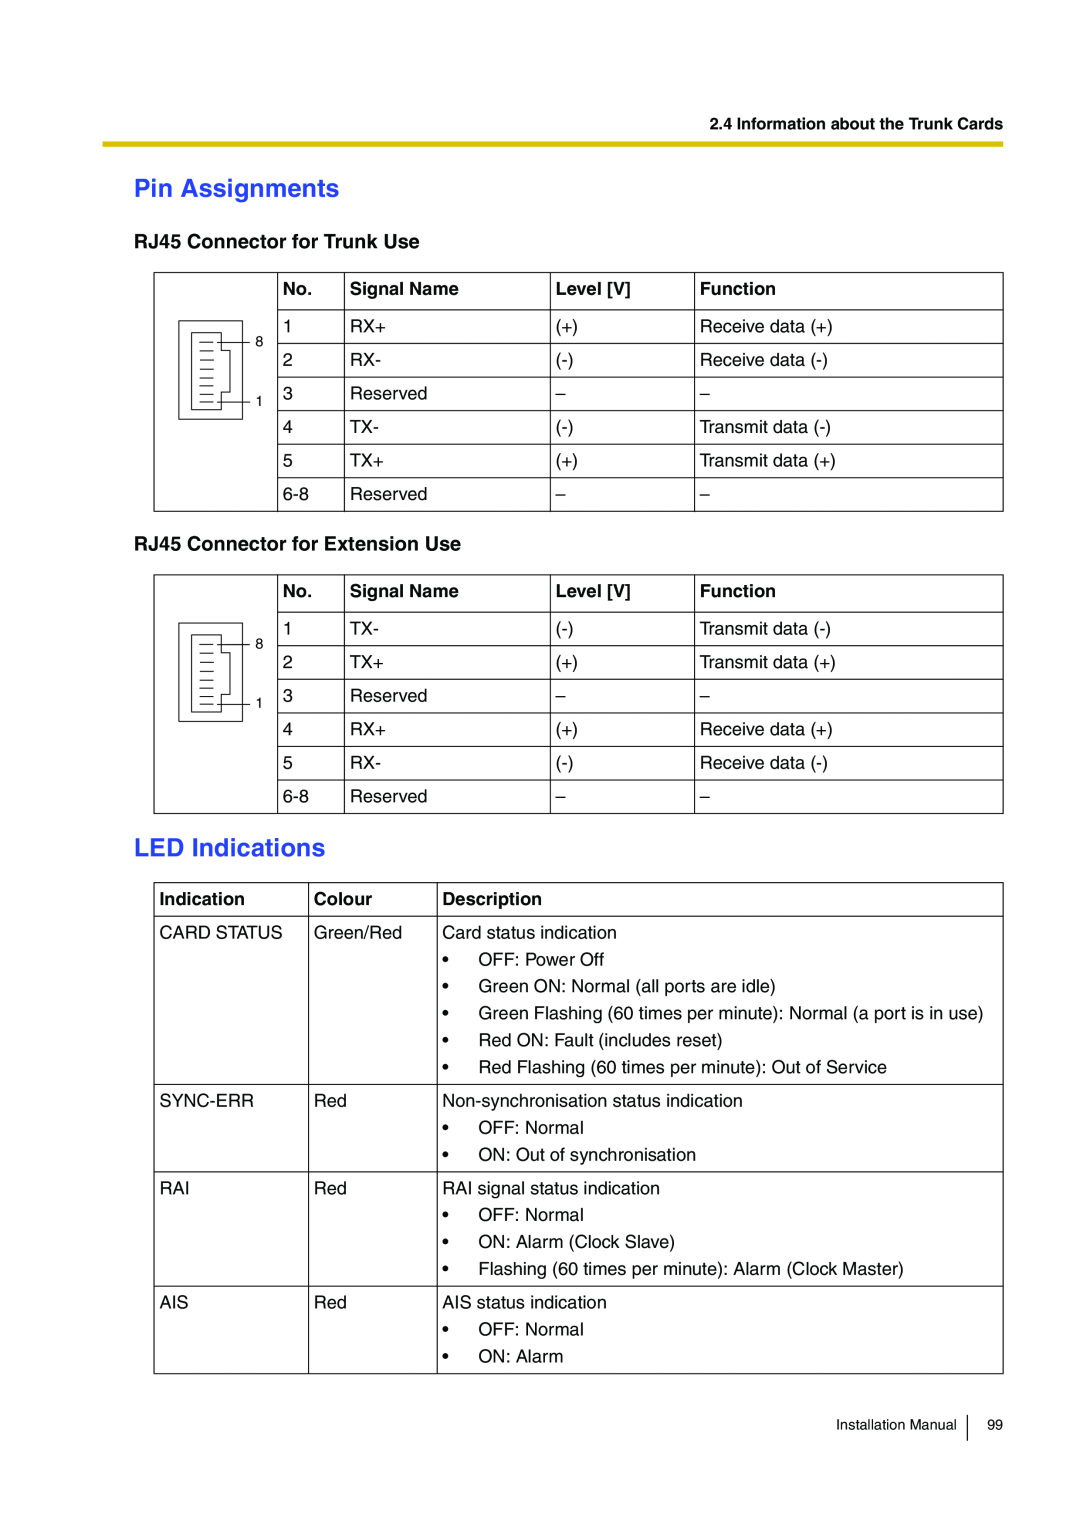 Panasonic KX-TDA100 Pin Assignments, LED Indications, RJ45 Connector for Trunk Use, RJ45 Connector for Extension Use 